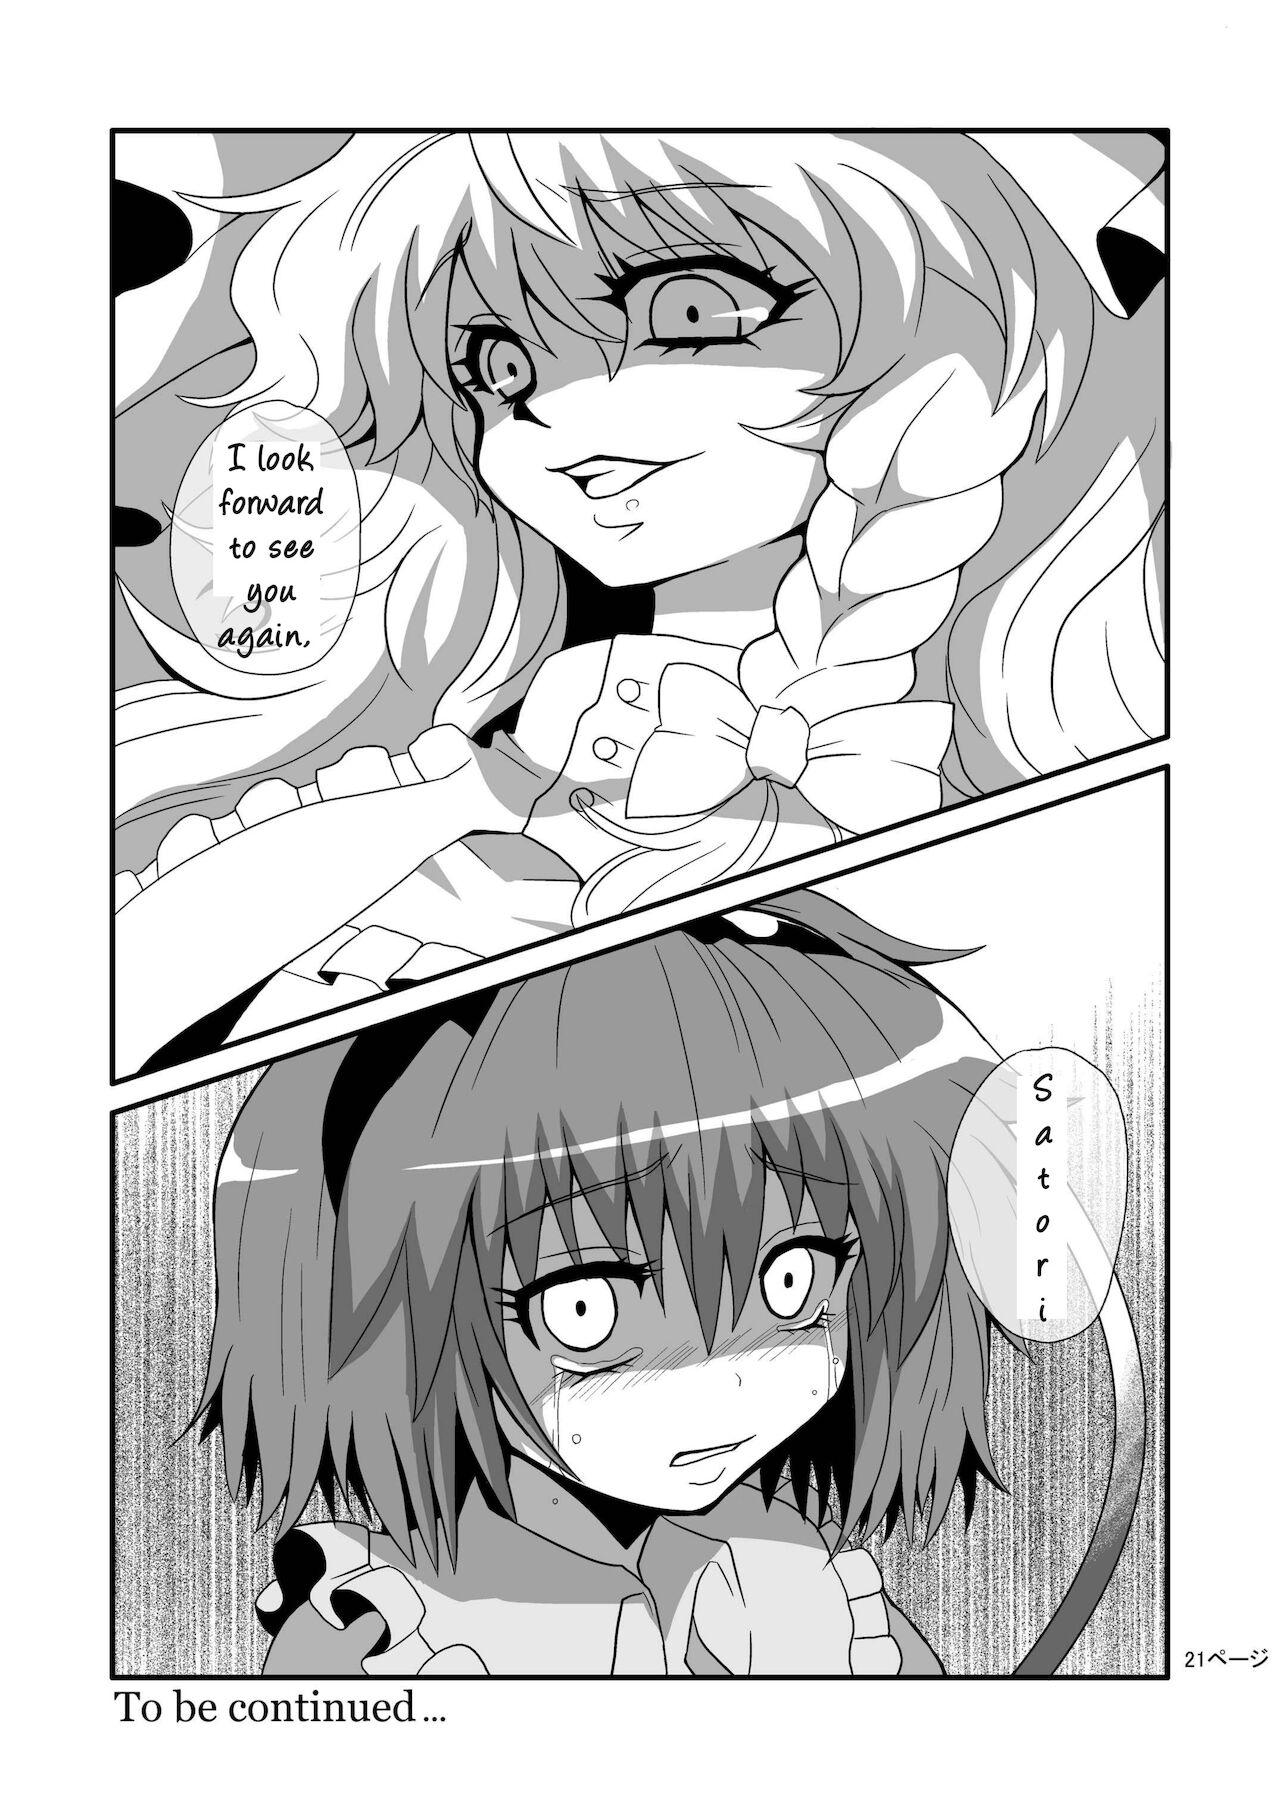 Big Ass [Zuru] Marisa's thrill - Take care of yourself - 通り魔理沙にきをつけろ - Part 1 - Touhou project Rubbing - Page 23